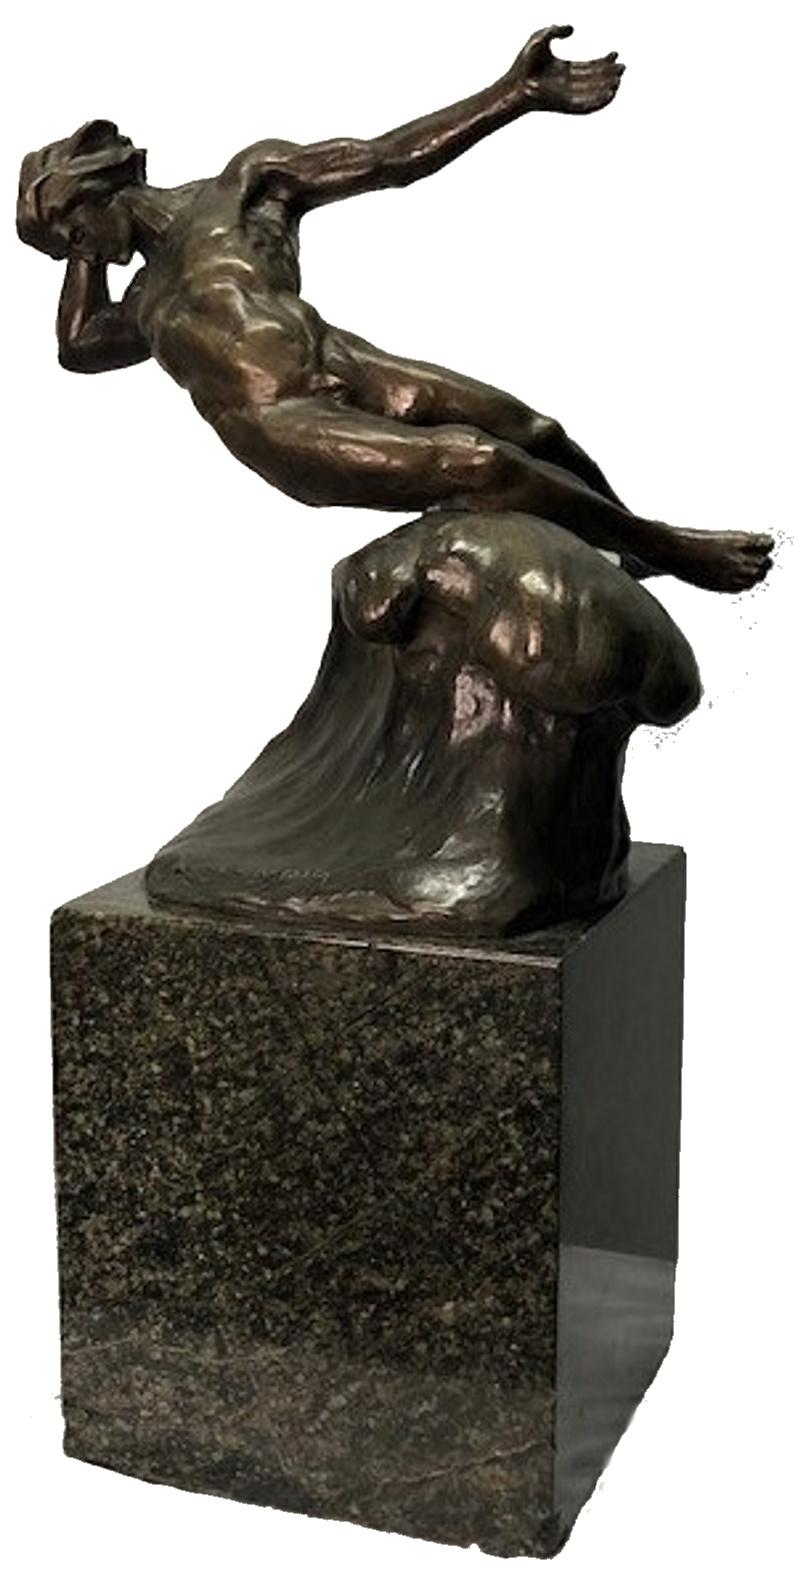 ABOUT ARTIST
Regretfully, there is only a limited amount of biographical information available on the author of this wonderful sculpture - Jacobus Nicolaus Sandig (Dutch, 1876 - 1933) was active/lived in the Netherlands, and is known for